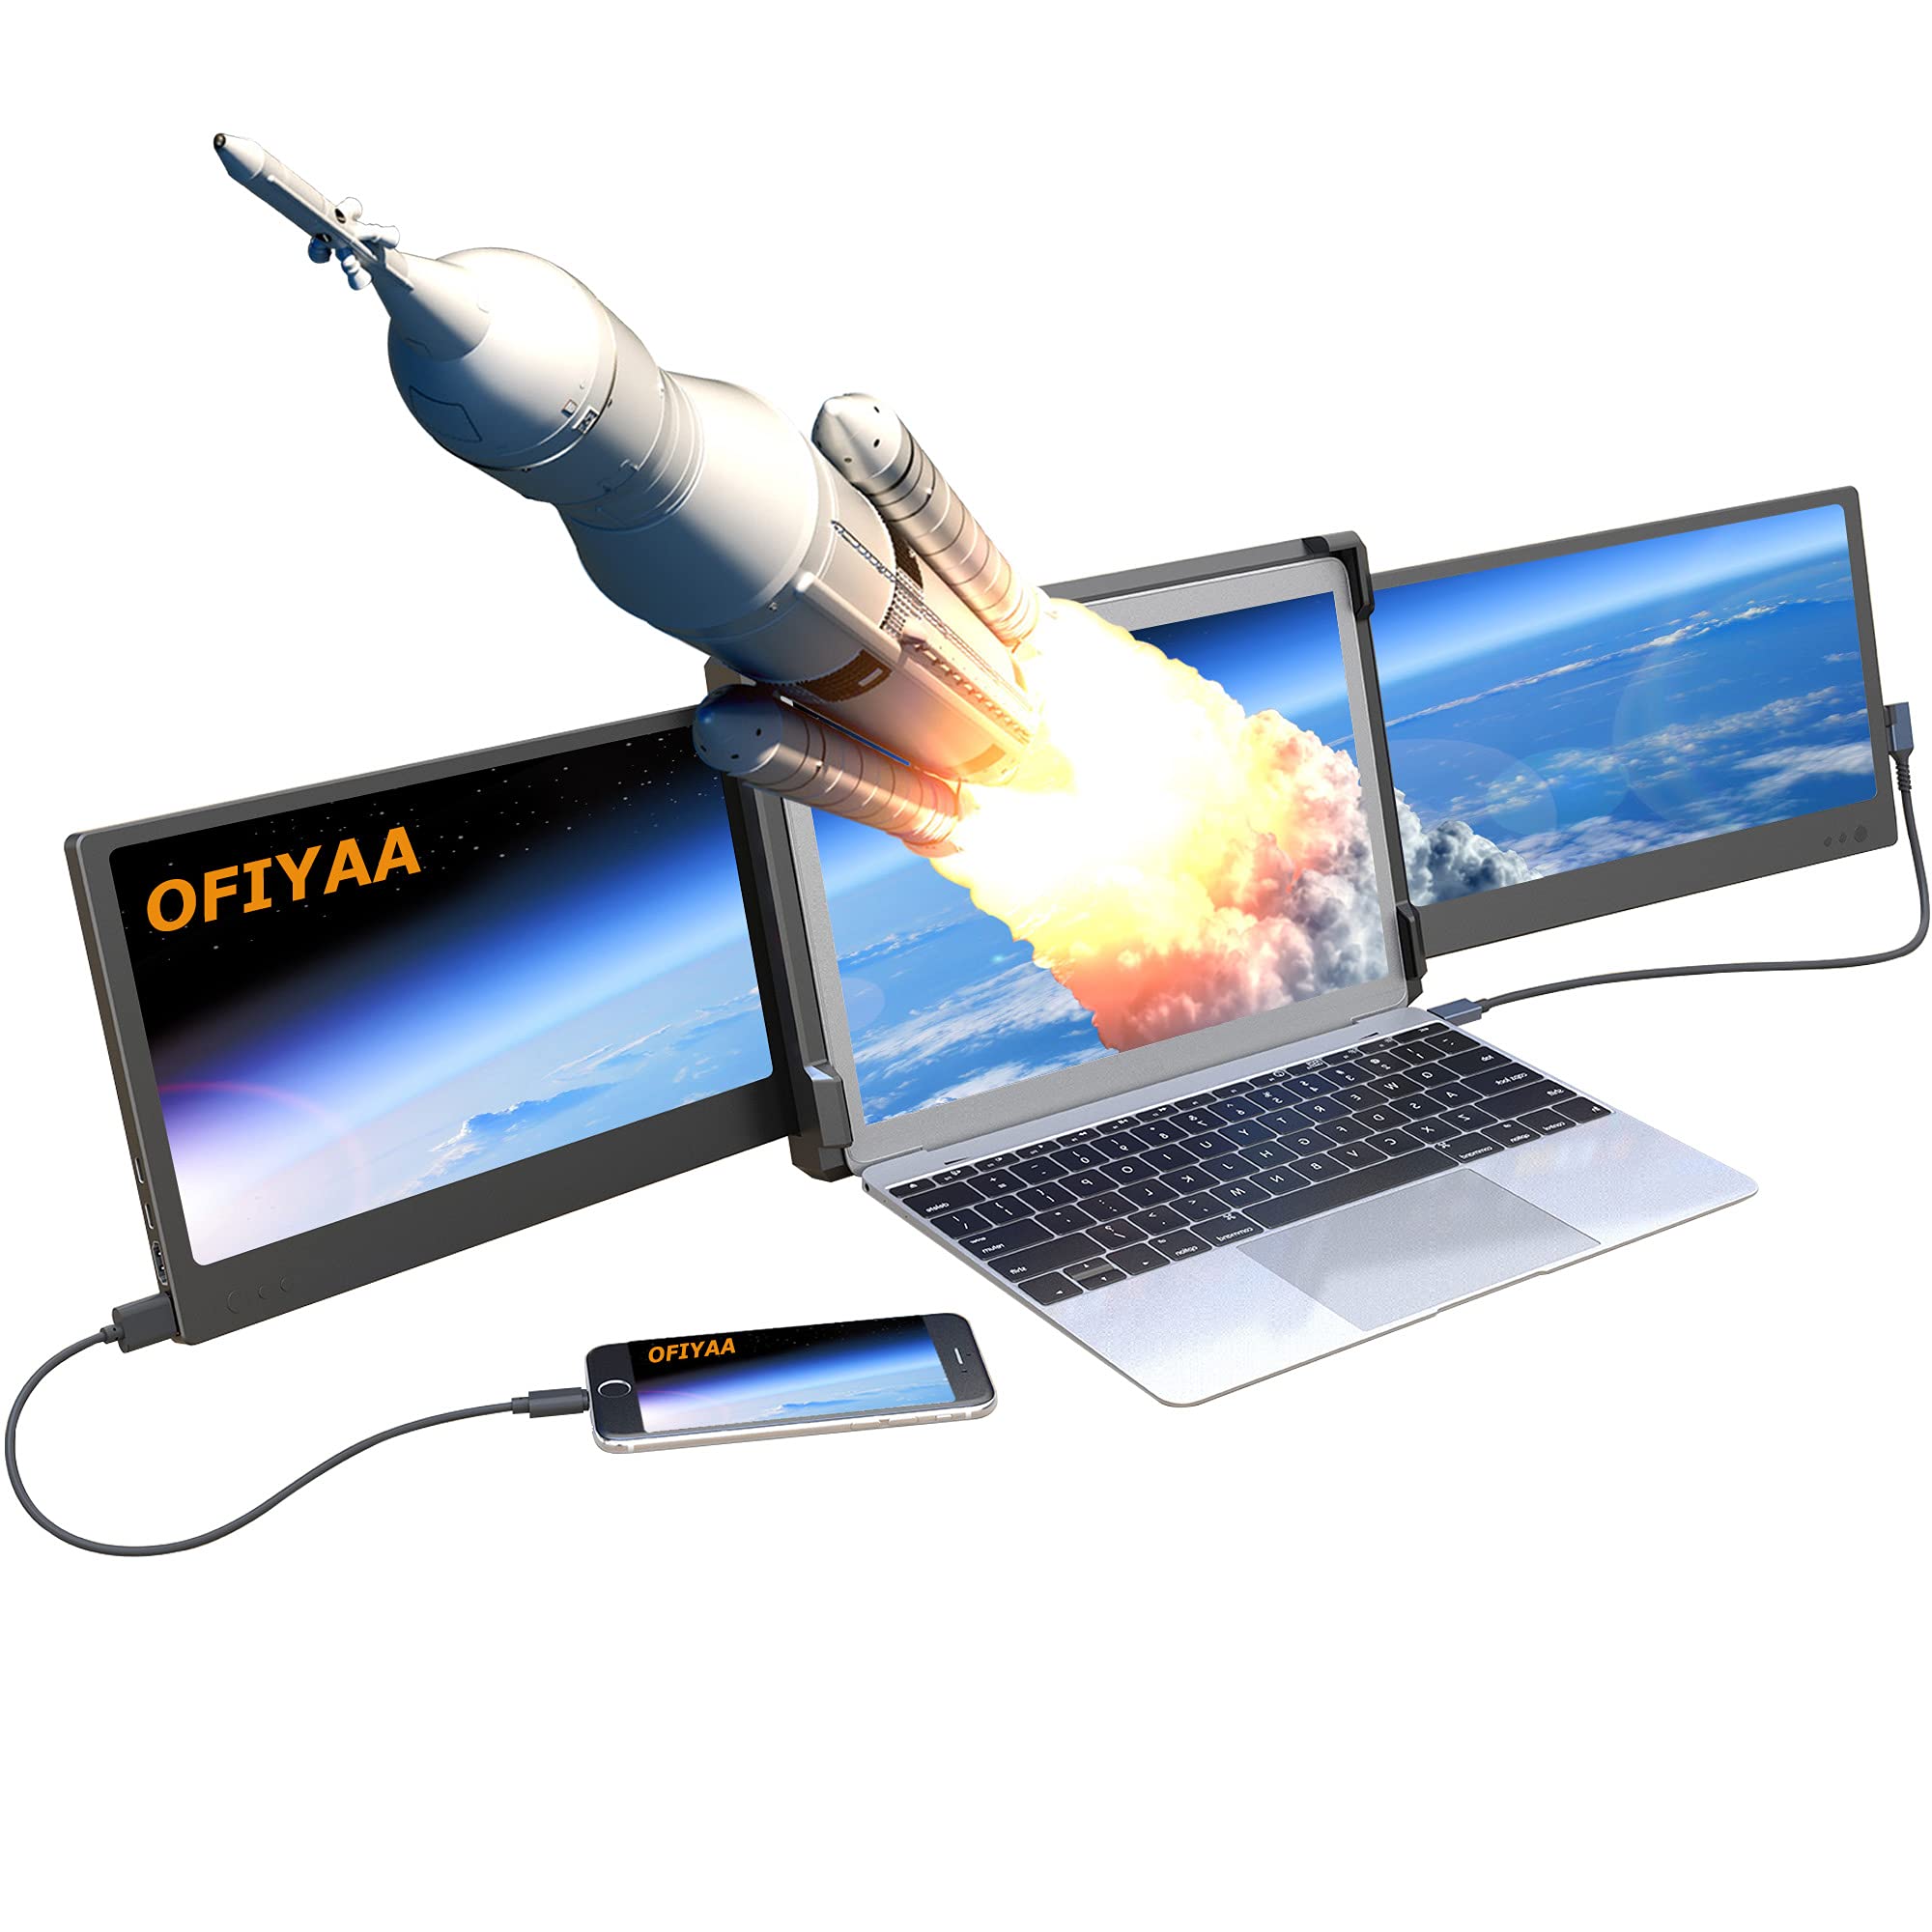 OFIYAA P2 12" Display Triple Portable Fold Monitor Laptop Monitor Extender FHD 1080P IPS 270° Plug and Play 4 Speakers Dual Monitor Laptop for ...